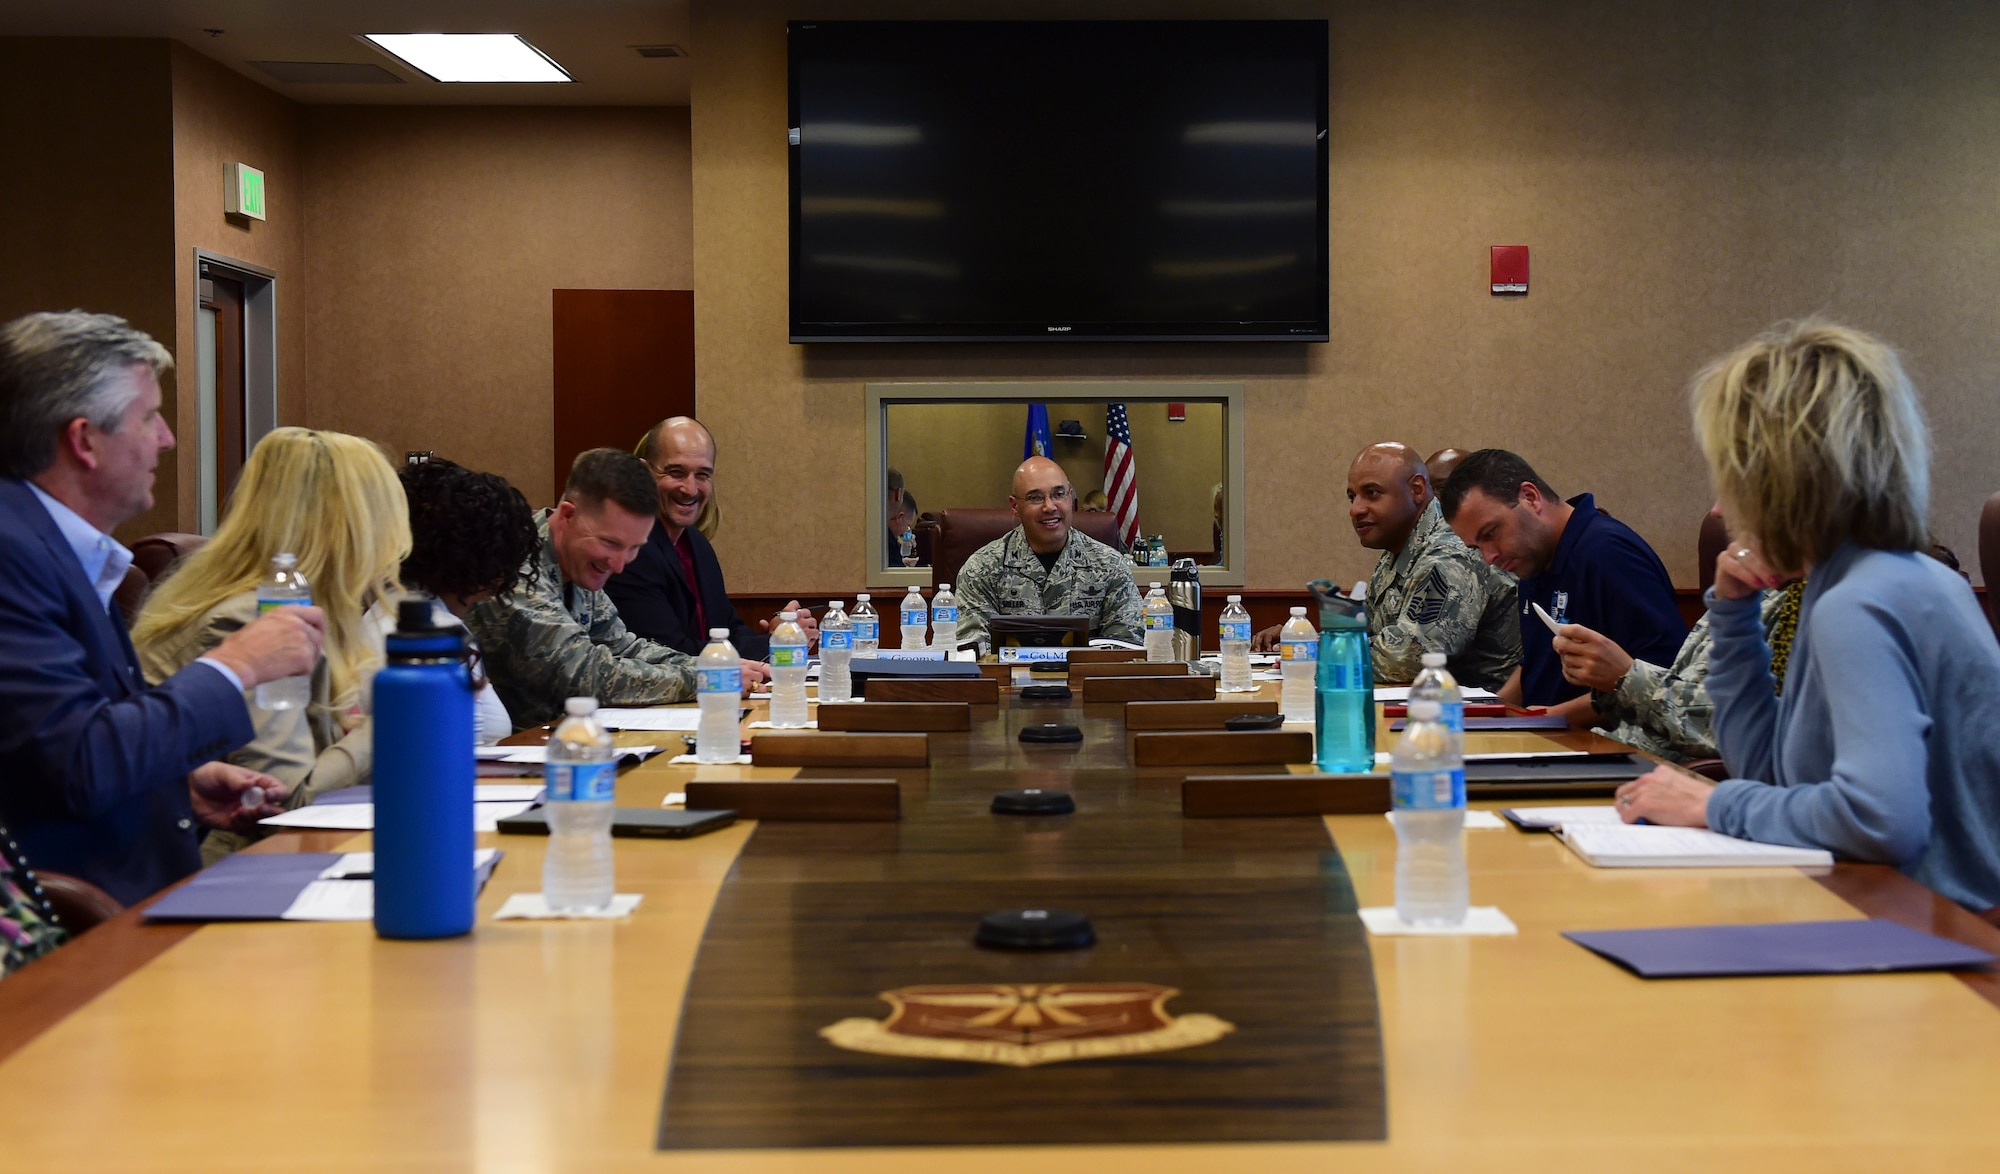 Leadership from Buckley Air Force Base and the Aurora School District hold a meeting June 5, 2017, on Buckley AFB, Colo. The meeting highlighted the importance of the school district’s outreach to military families and support for children with deployed parents. (U.S. Air Force photo by Airman Jacob Deatherage/Released)